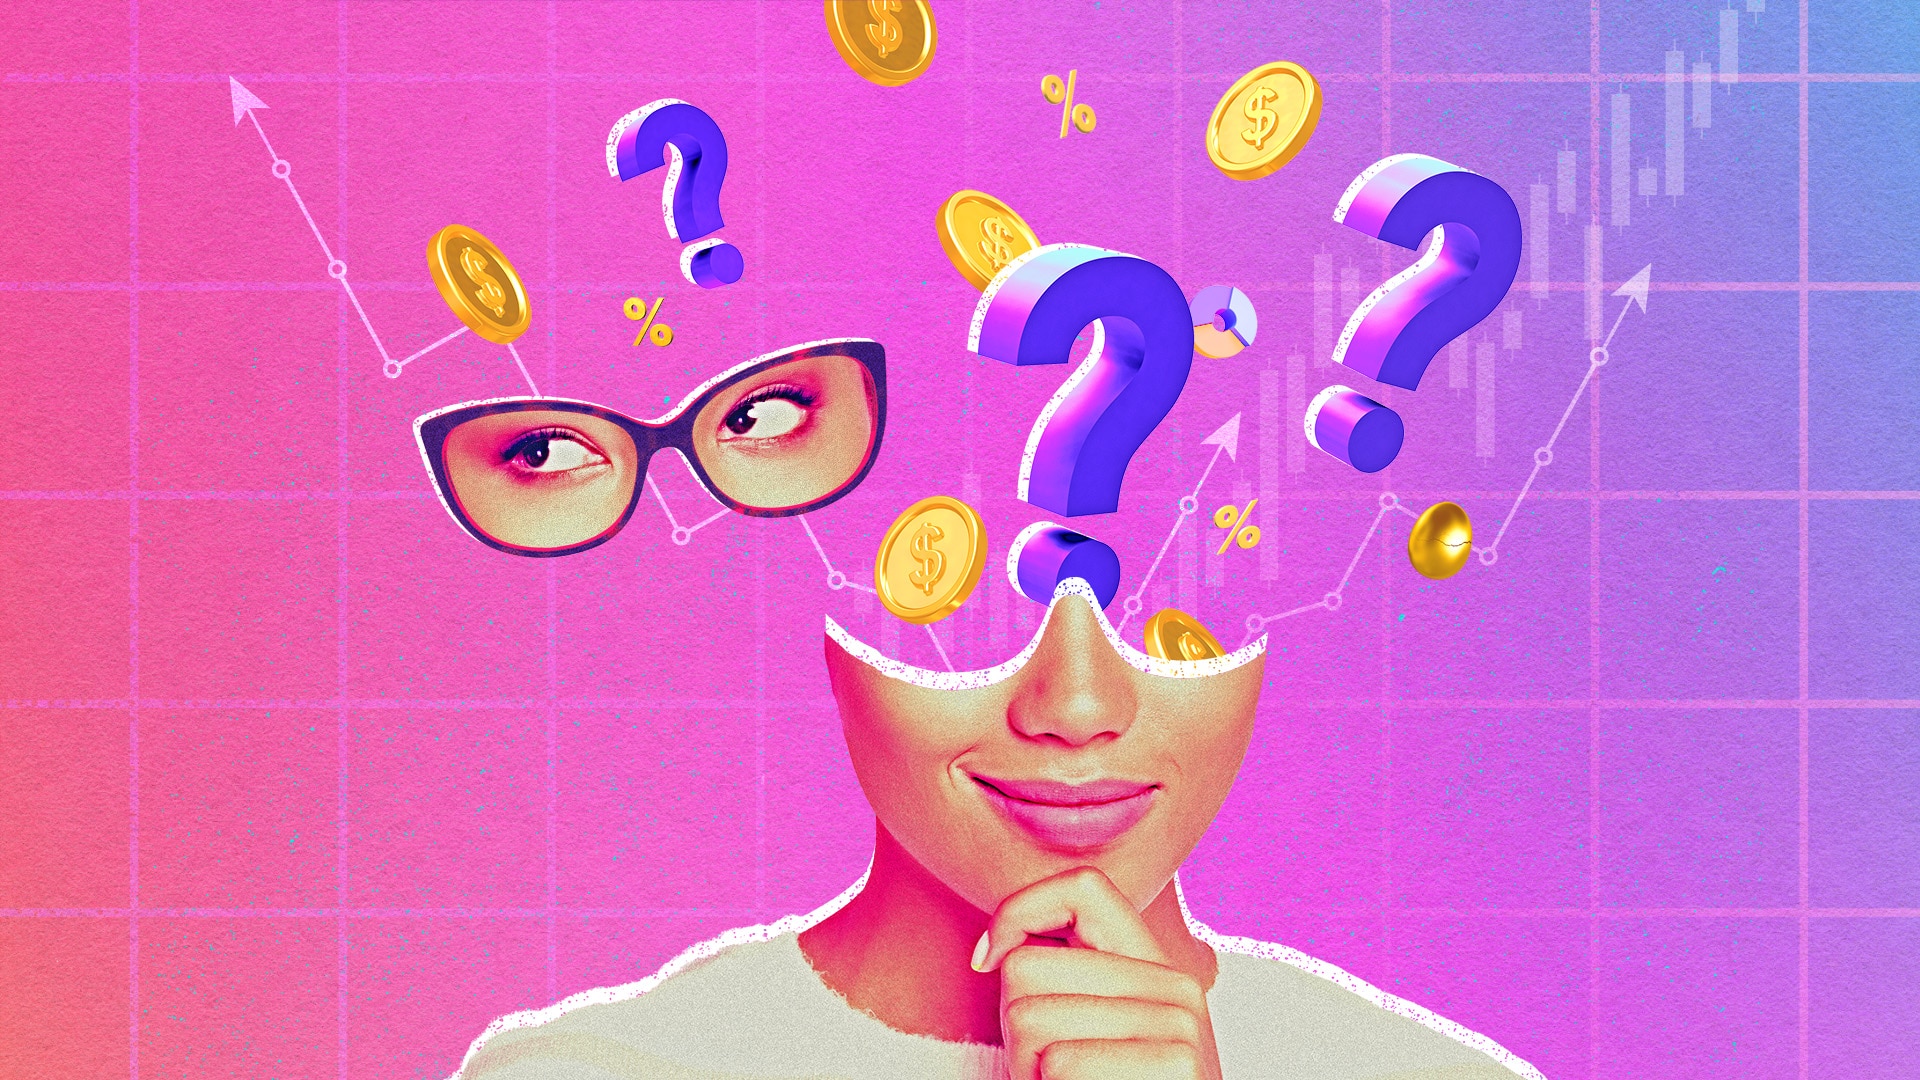 Illustrative collage featuring question marks, stock market